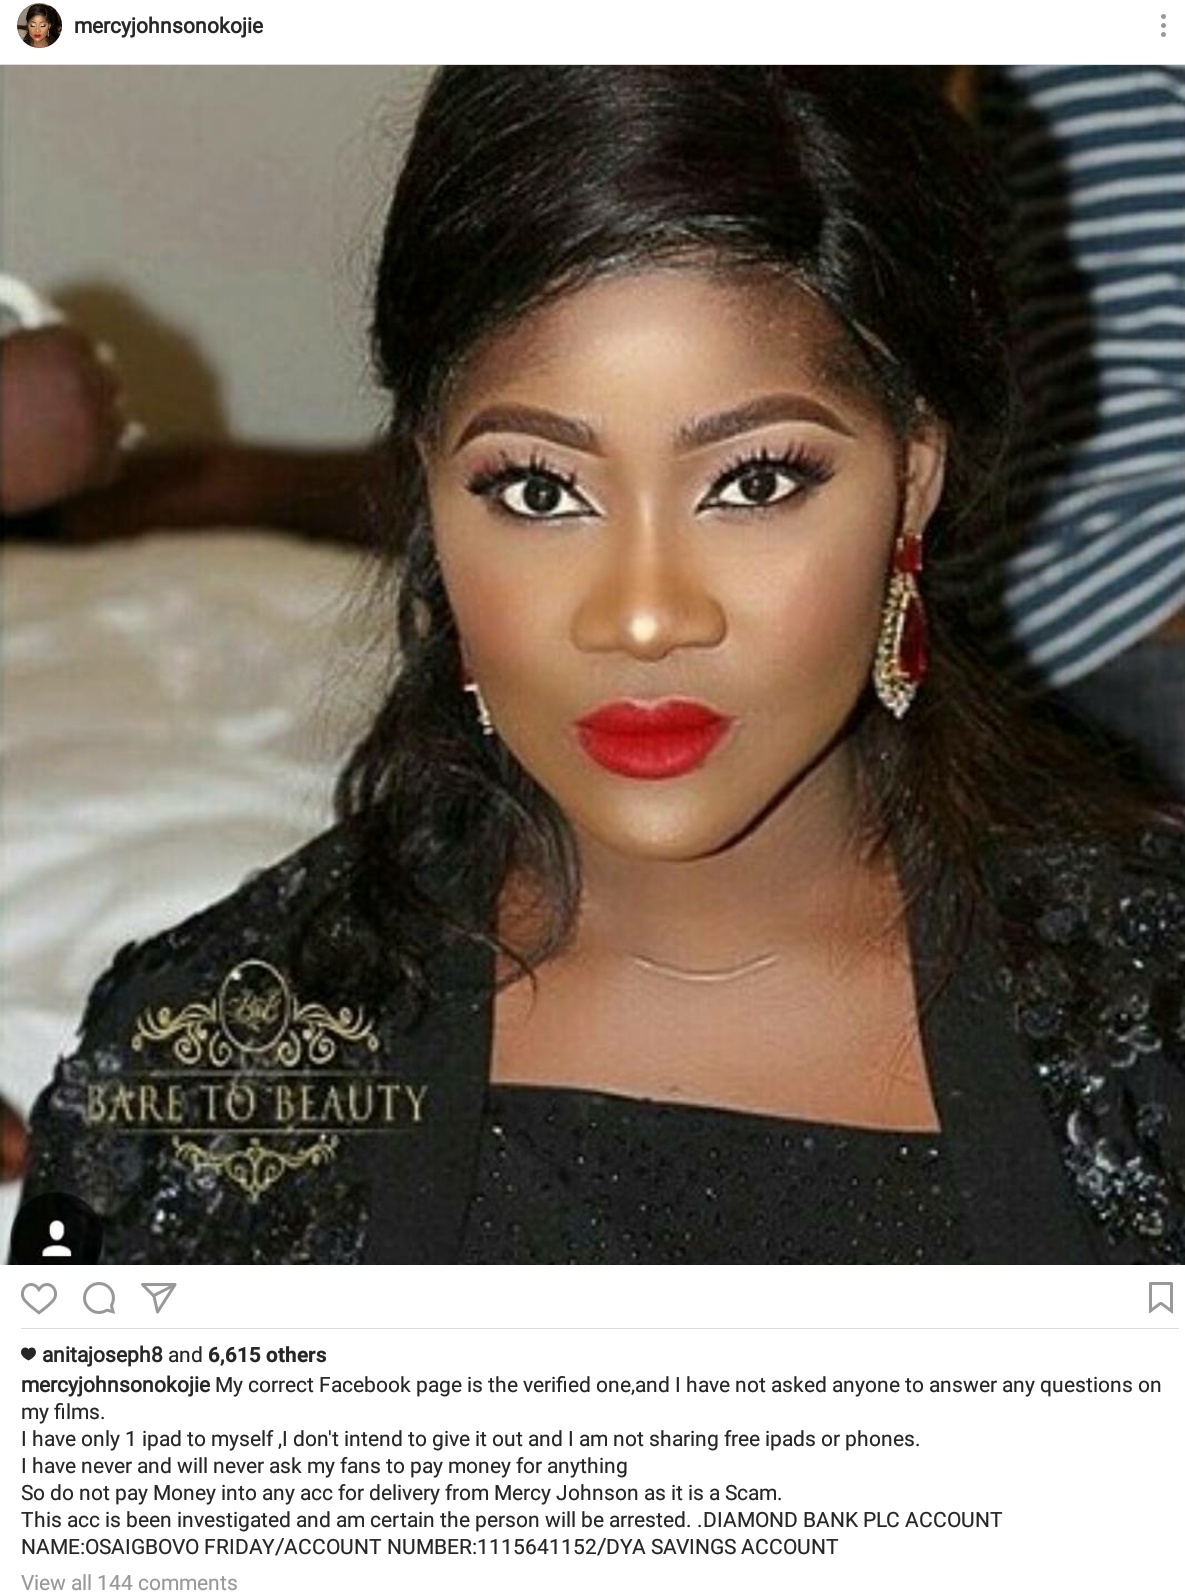 Mercy Johnson Warns On Scammer Using Her Name To Extort And Make False Promises Of Gifting iPads And Phones